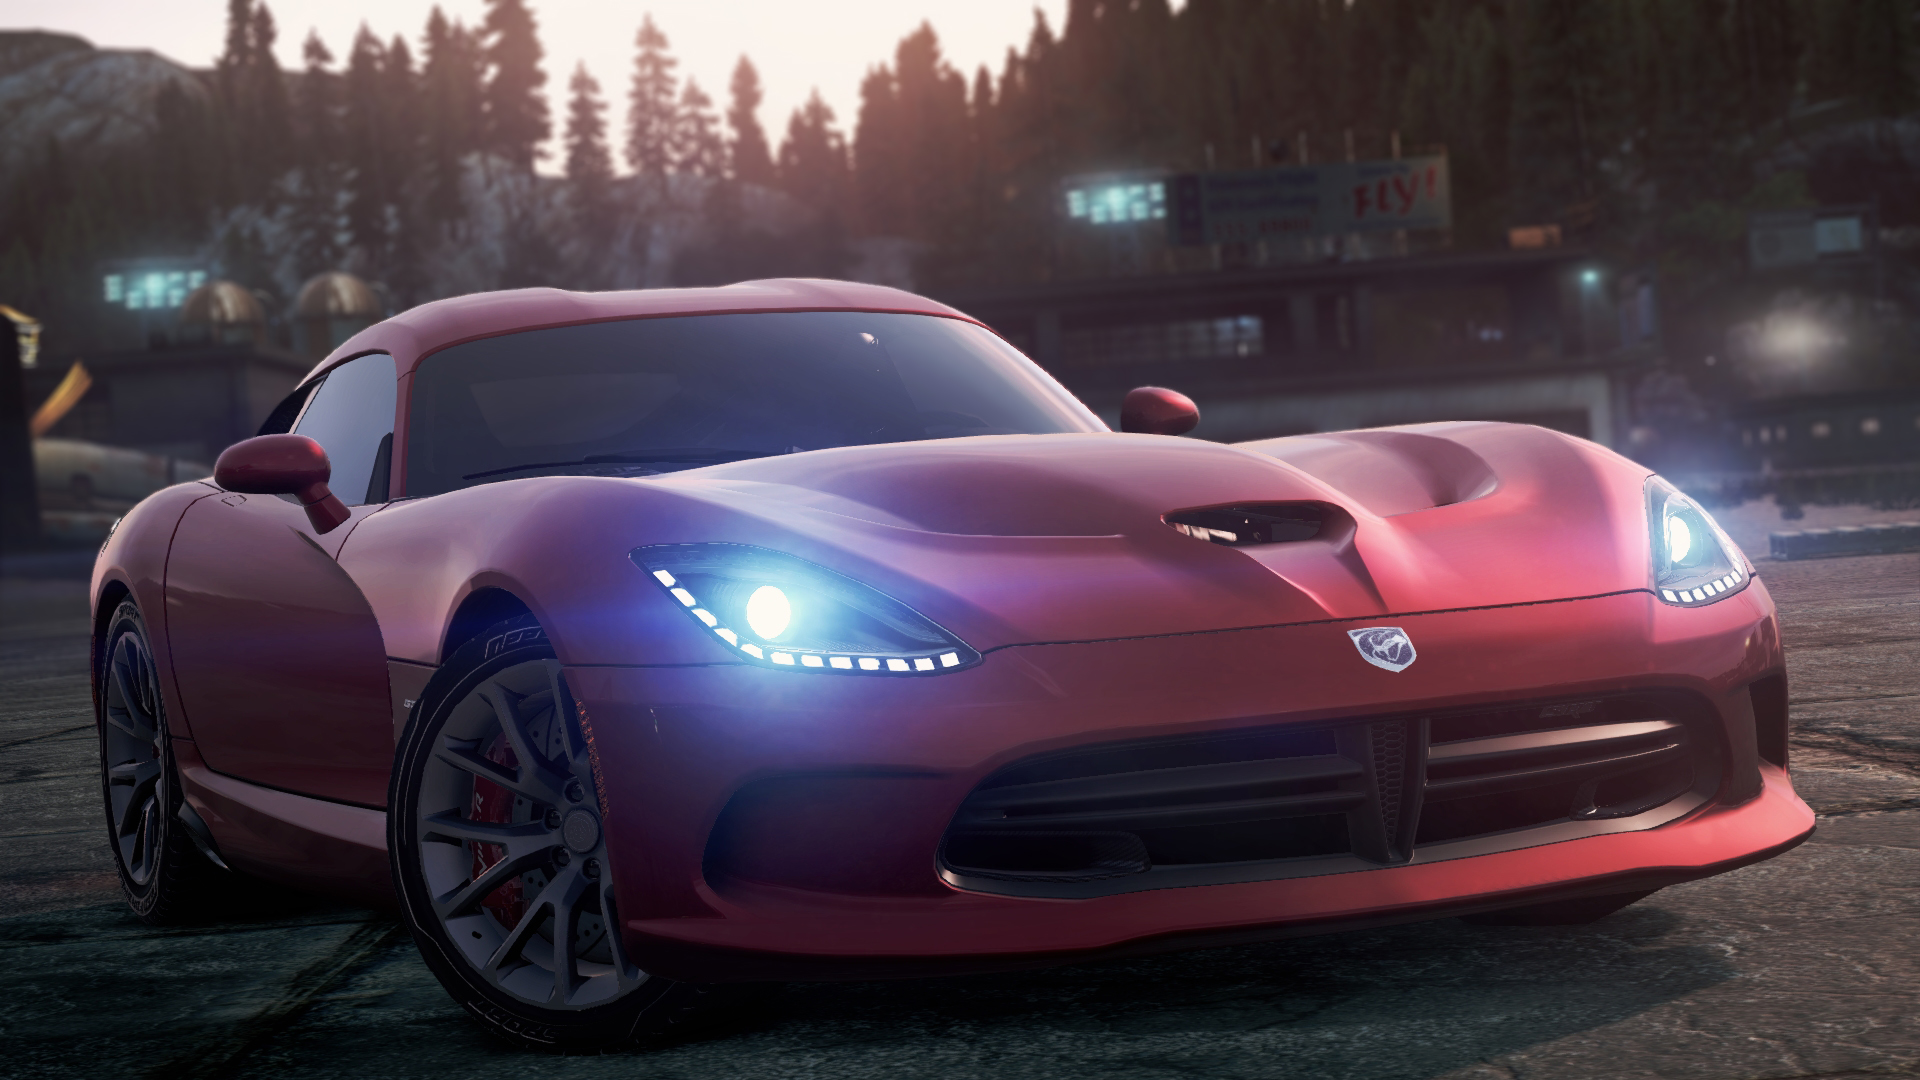 Need for Speed™ Heat Official Reveal Trailer 